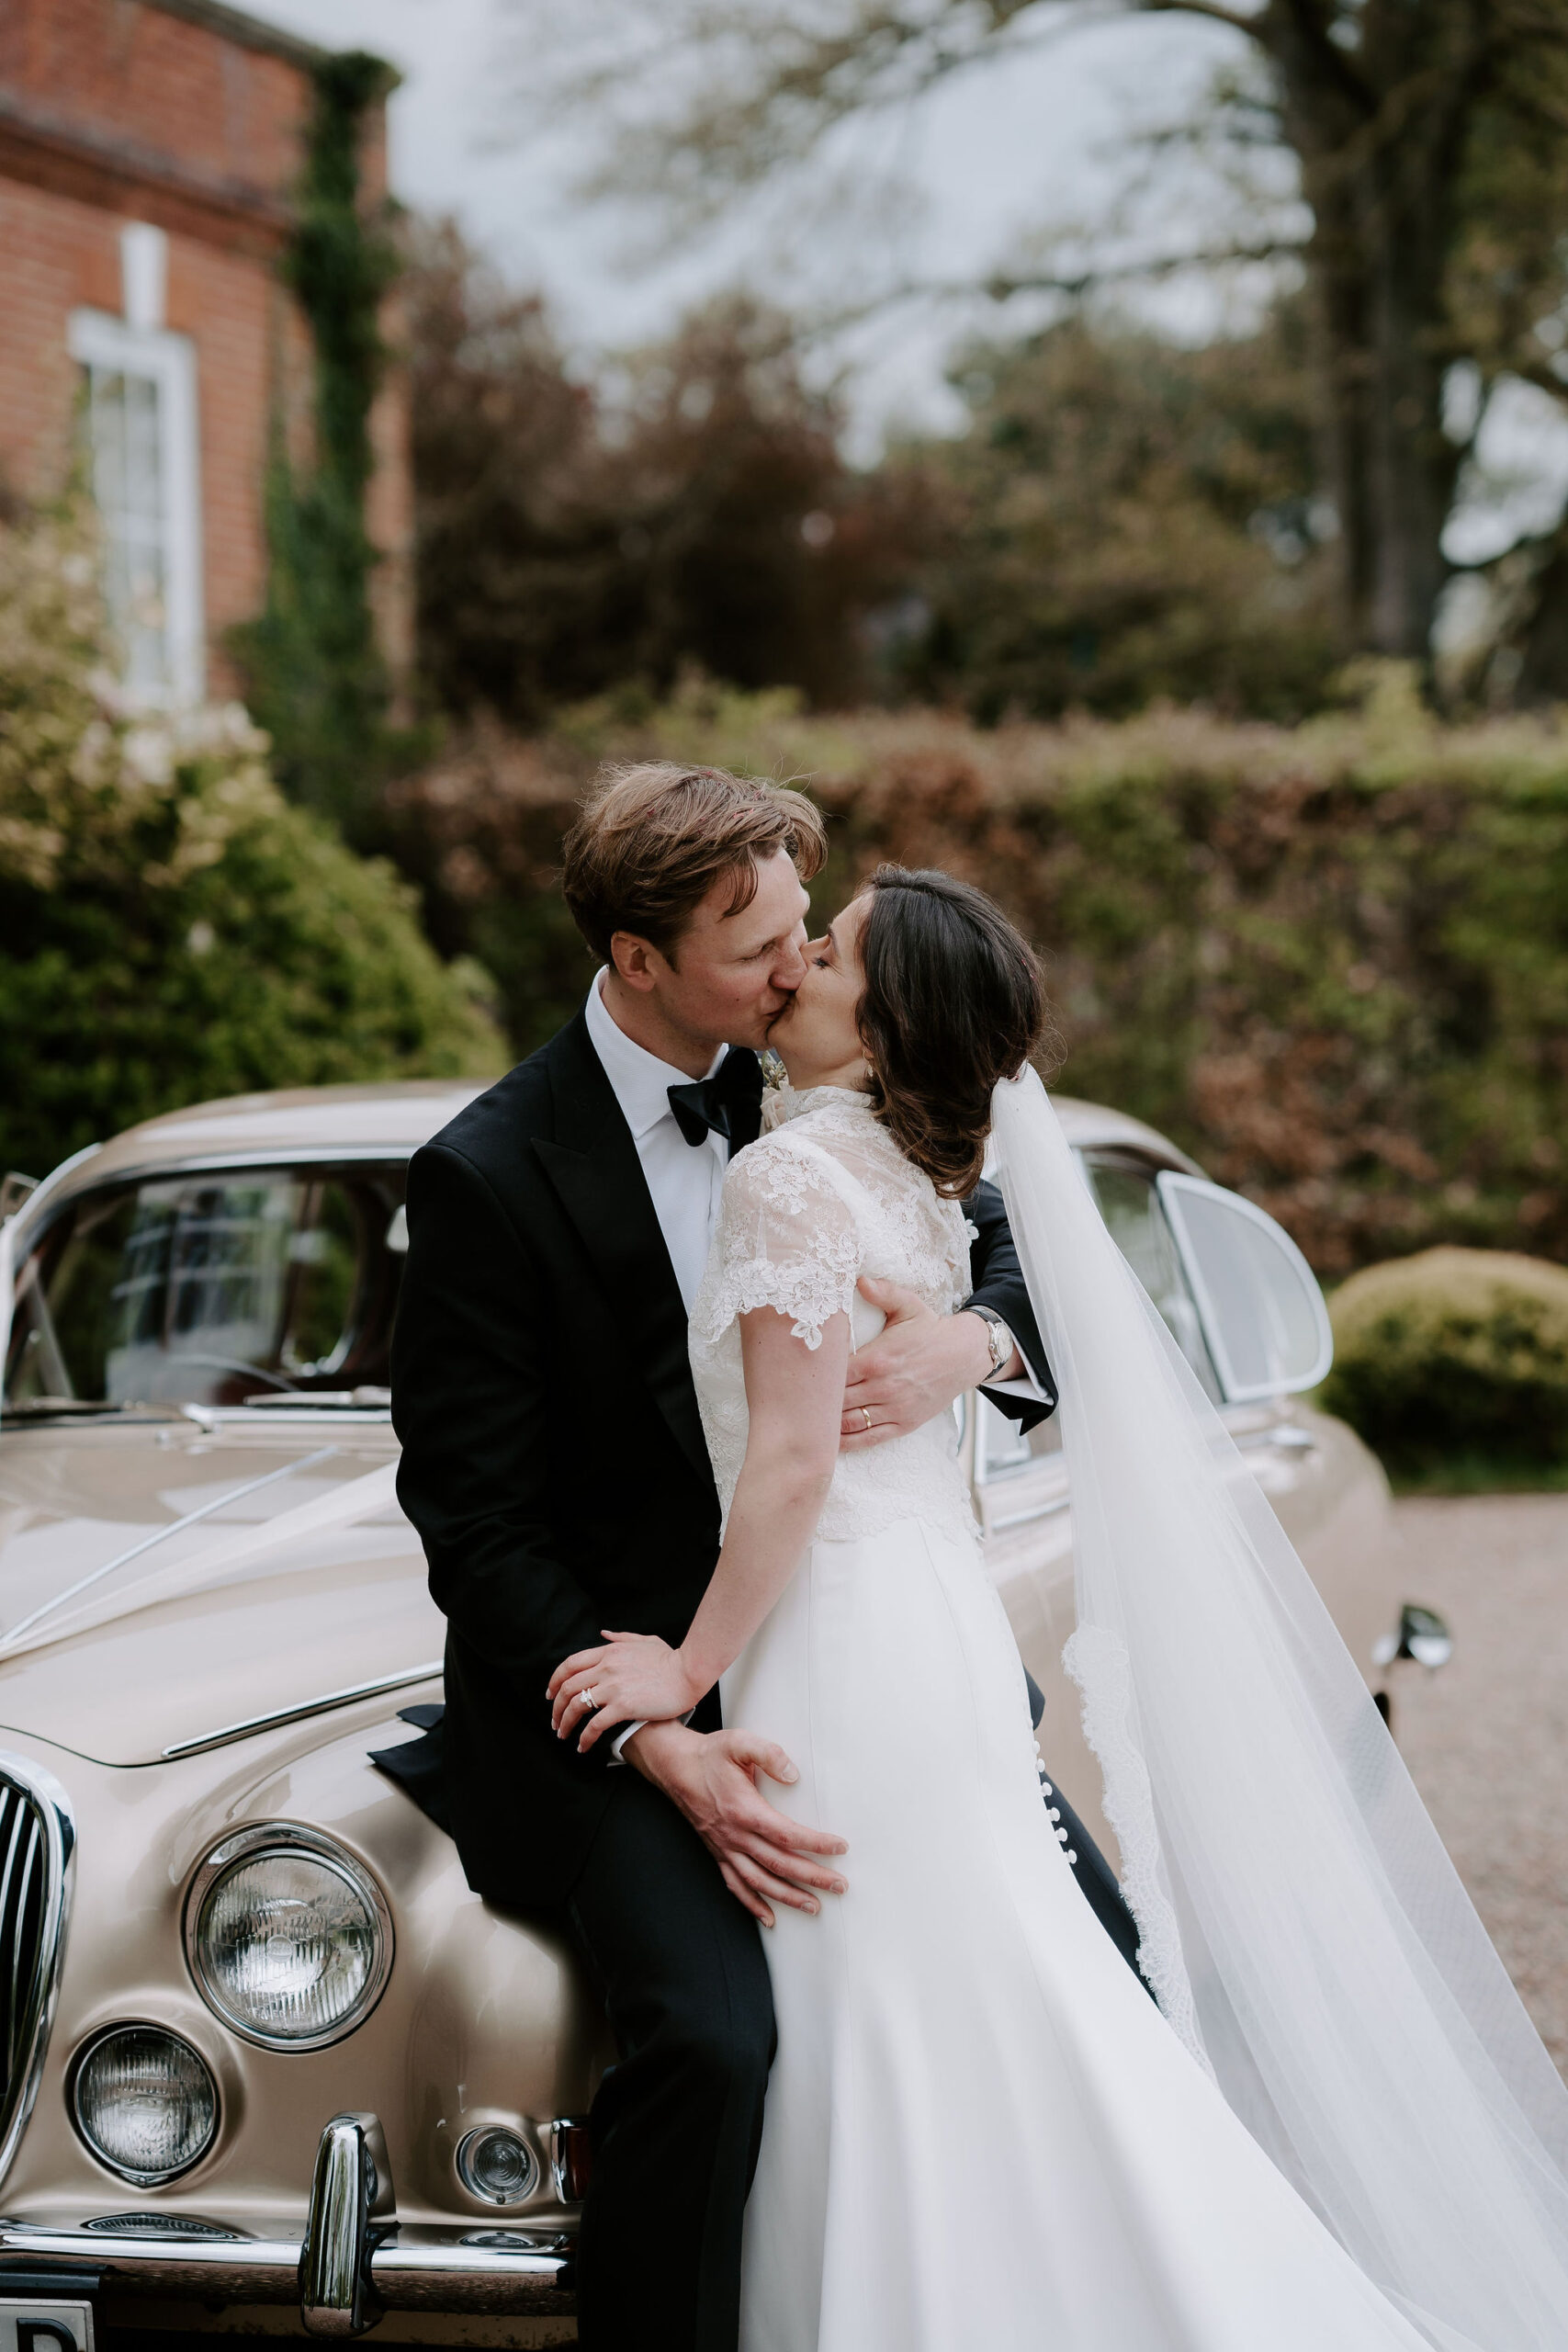 A groom wearing black tie and a bride wearing a lace short sleeved dress kiss next to an old vintage car